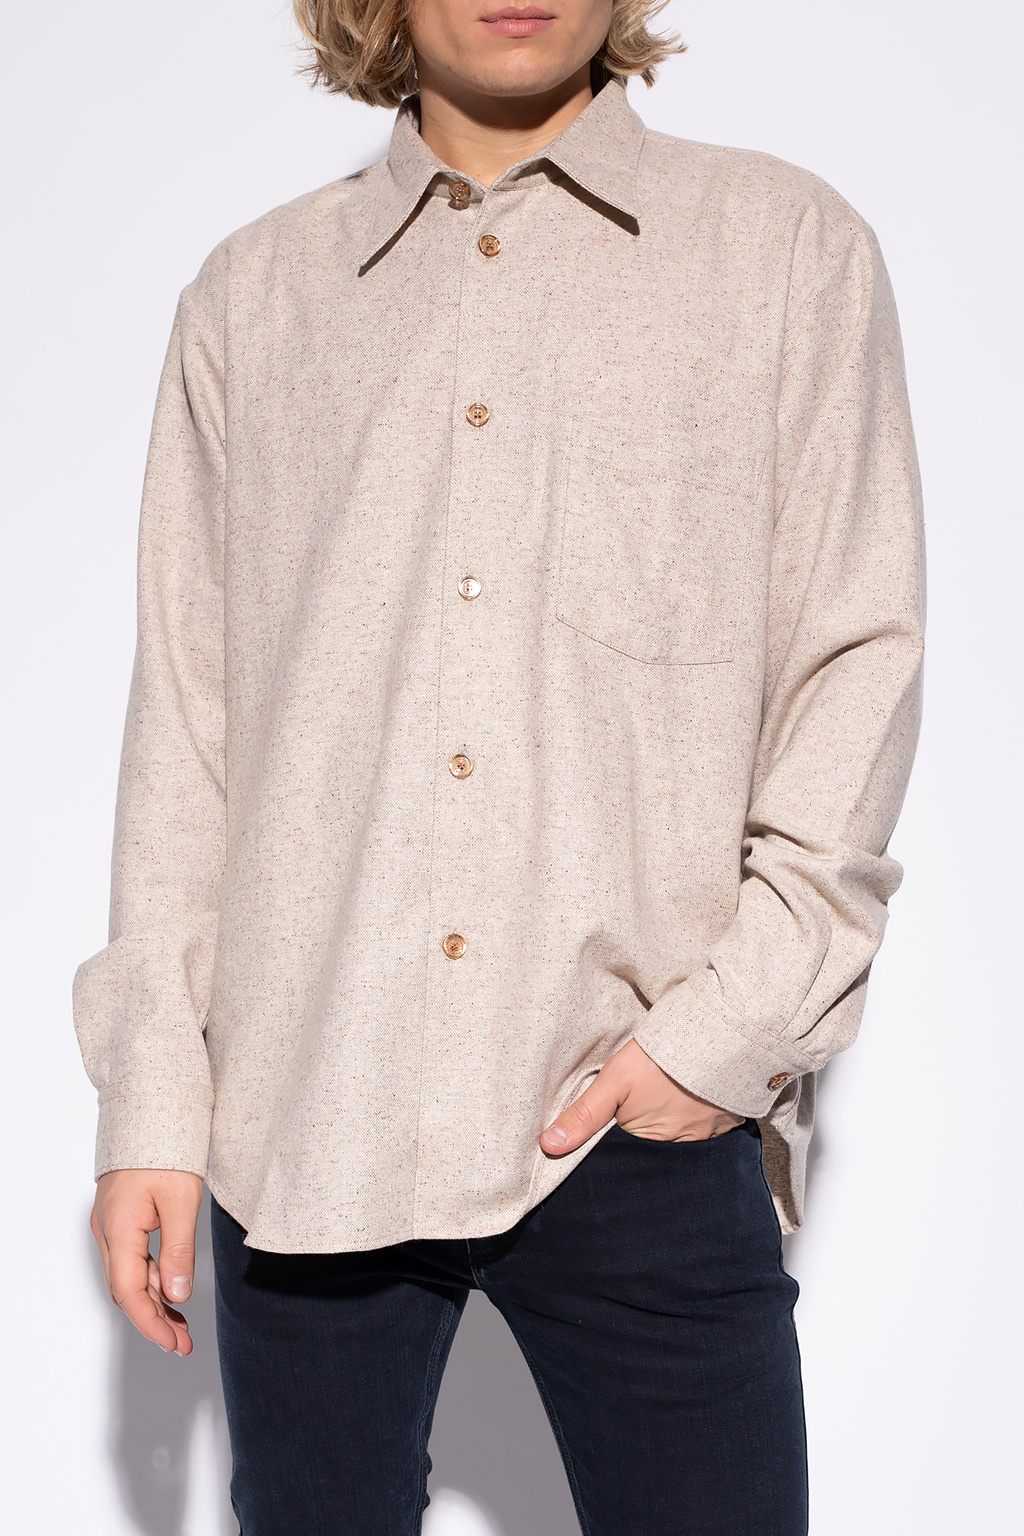 Superdry Sweater Roll Neck Lambswool - Shirt with pocket Acne